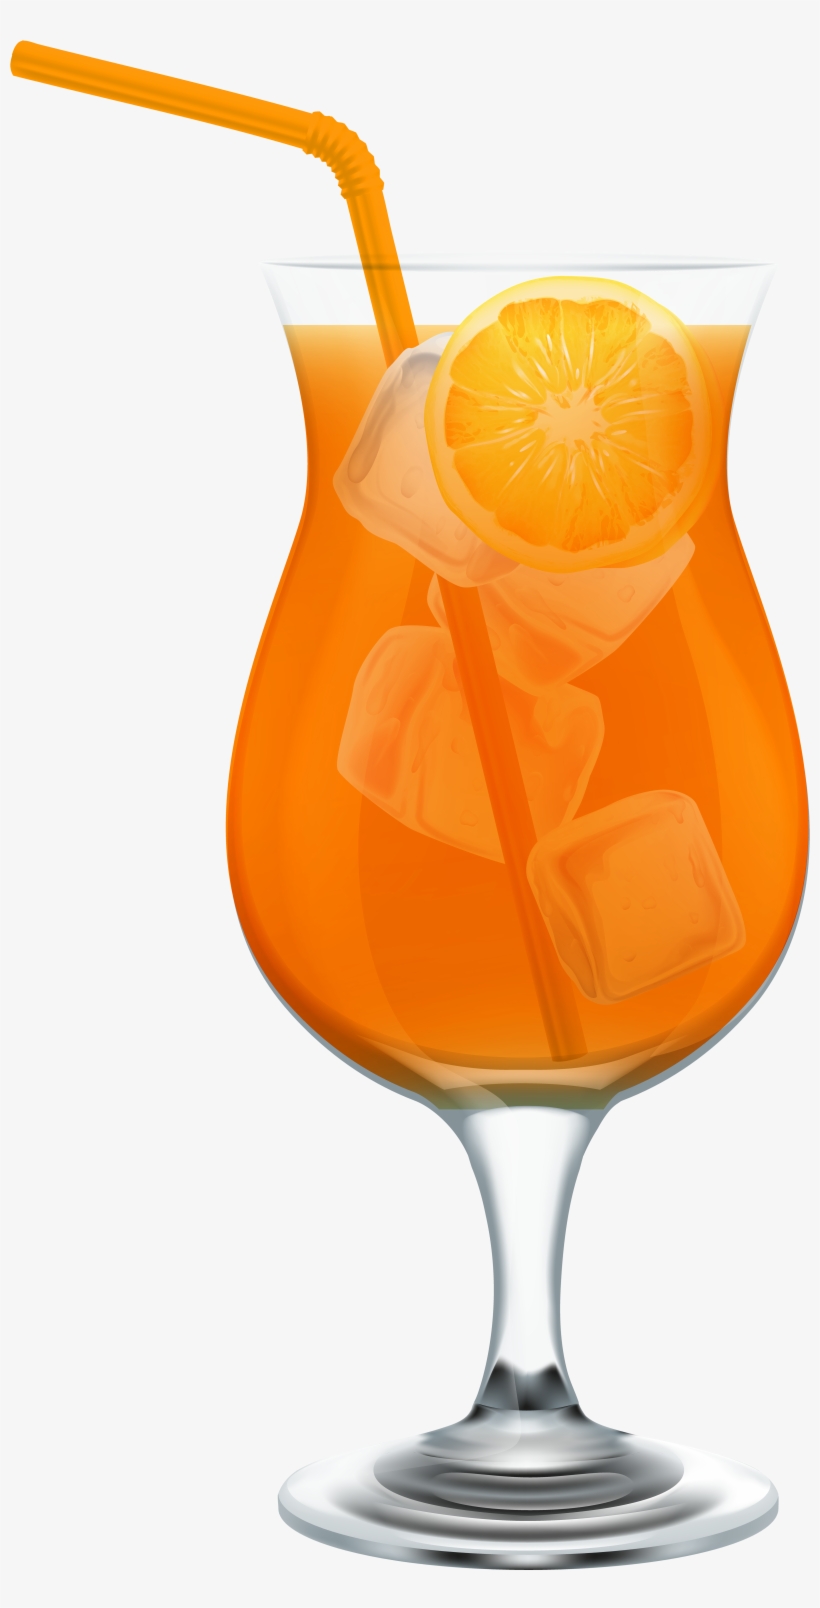 View Full Size - Juice Clipart Png, transparent png #598322